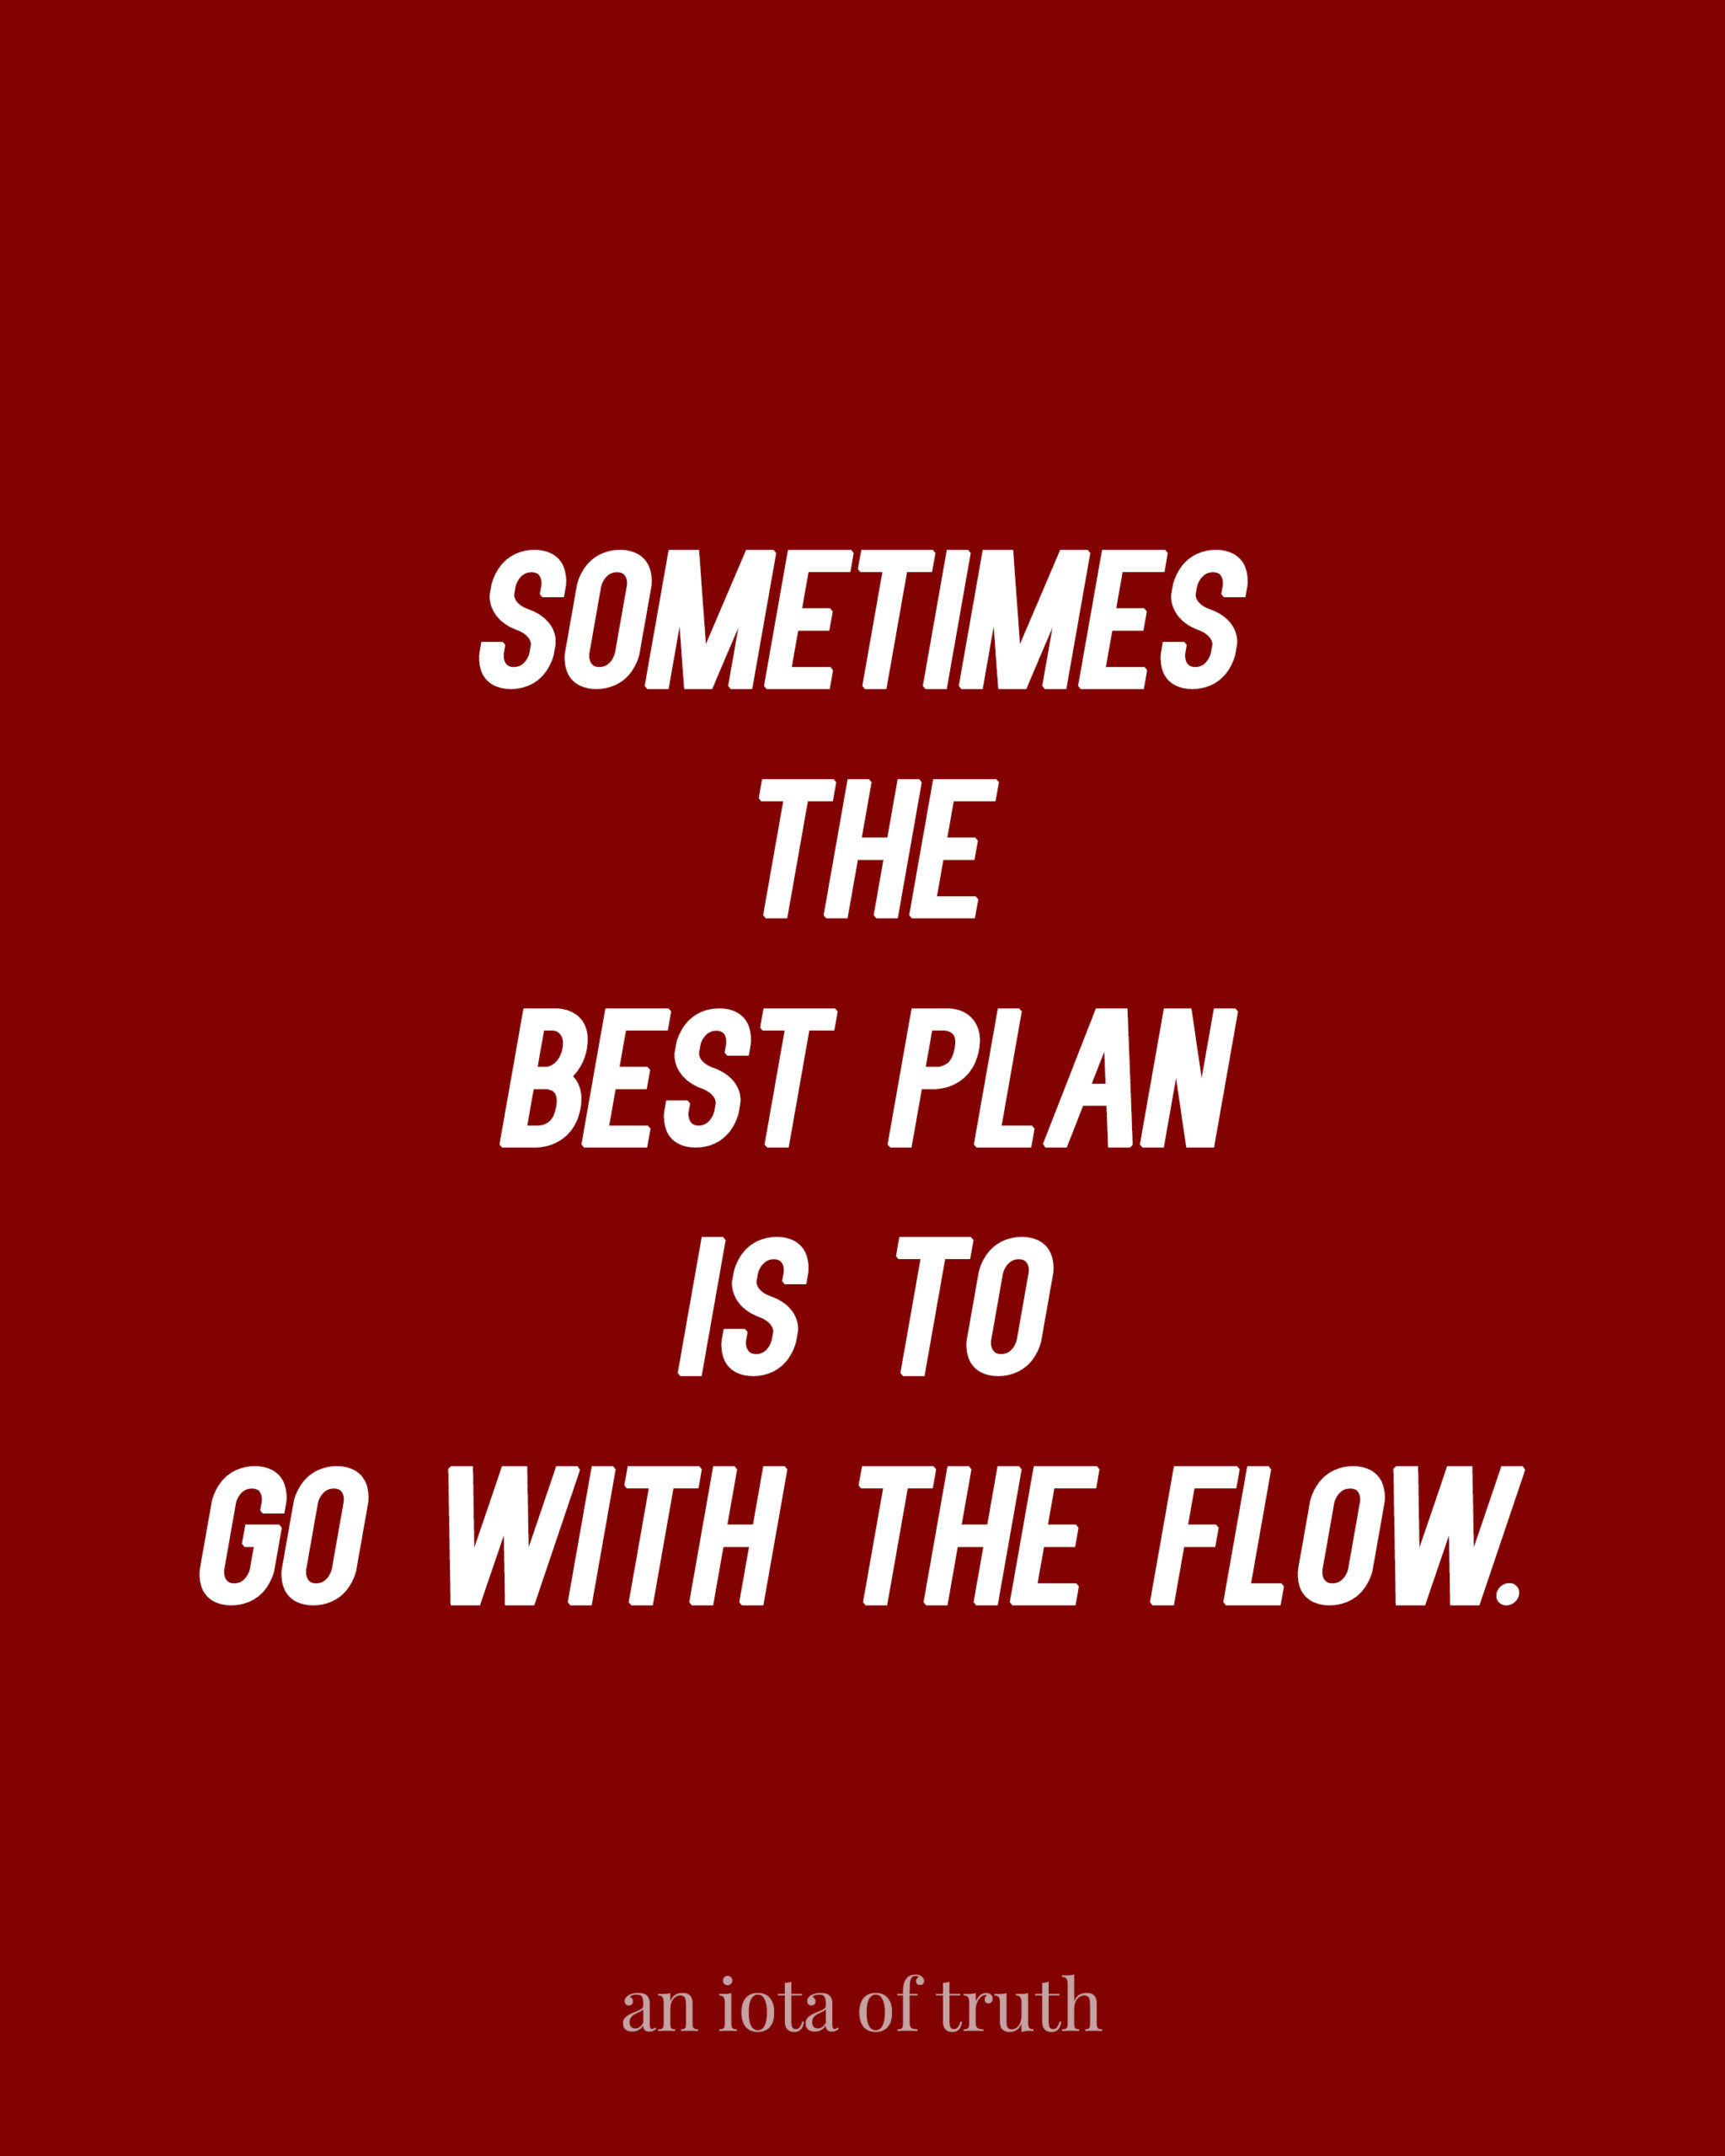 Sometimes the best plan is to go with the flow.